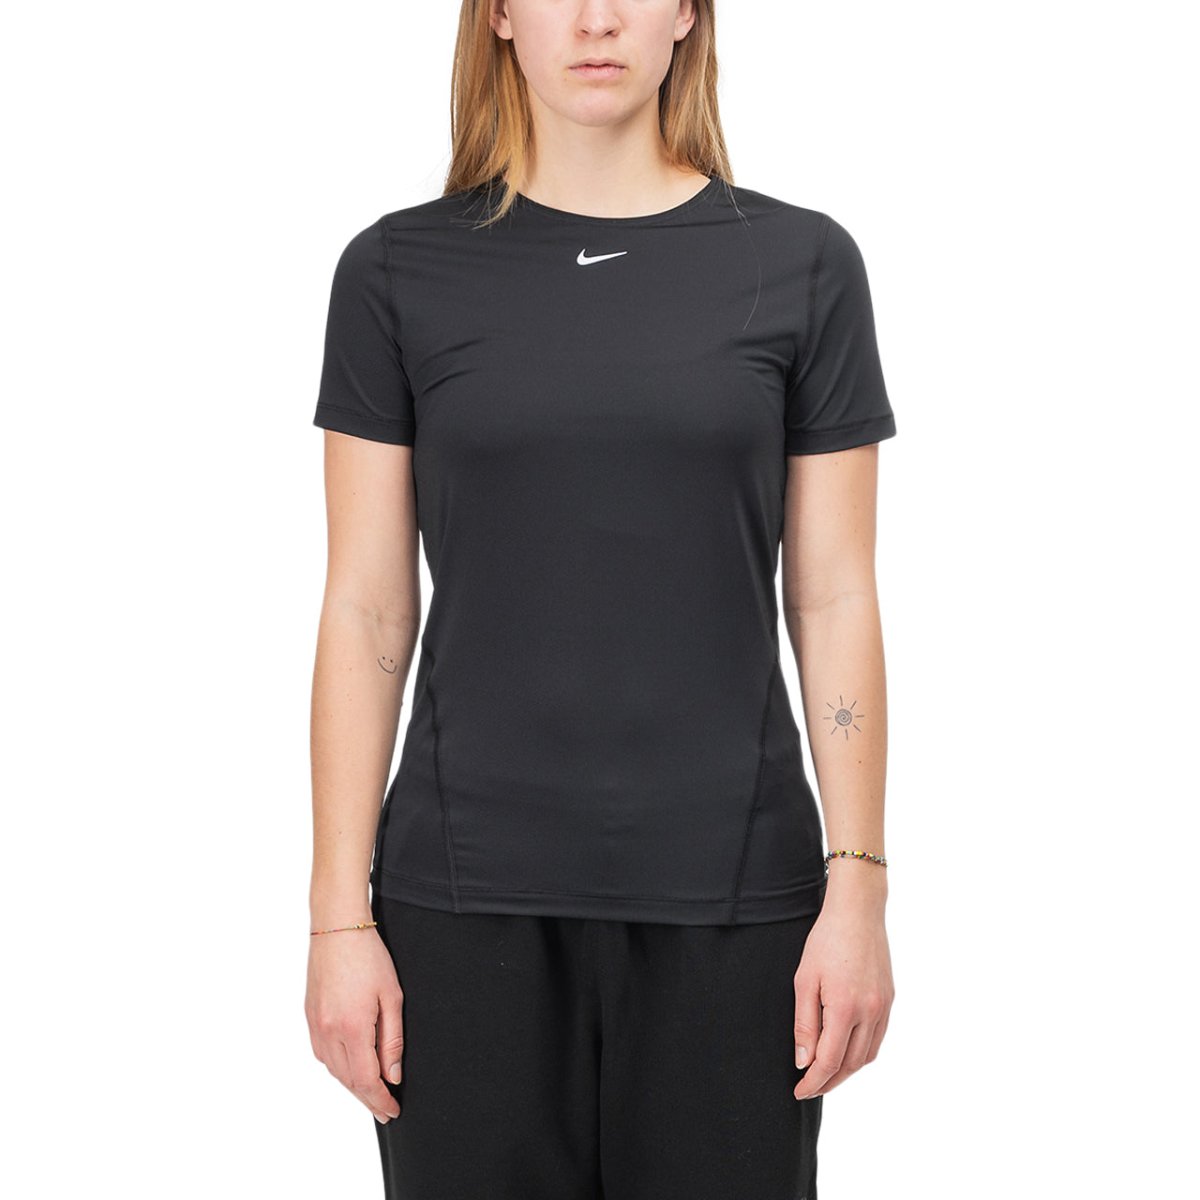 Image of Nike WMNS Pro 365 Short-Sleeve Essential Top (Black)